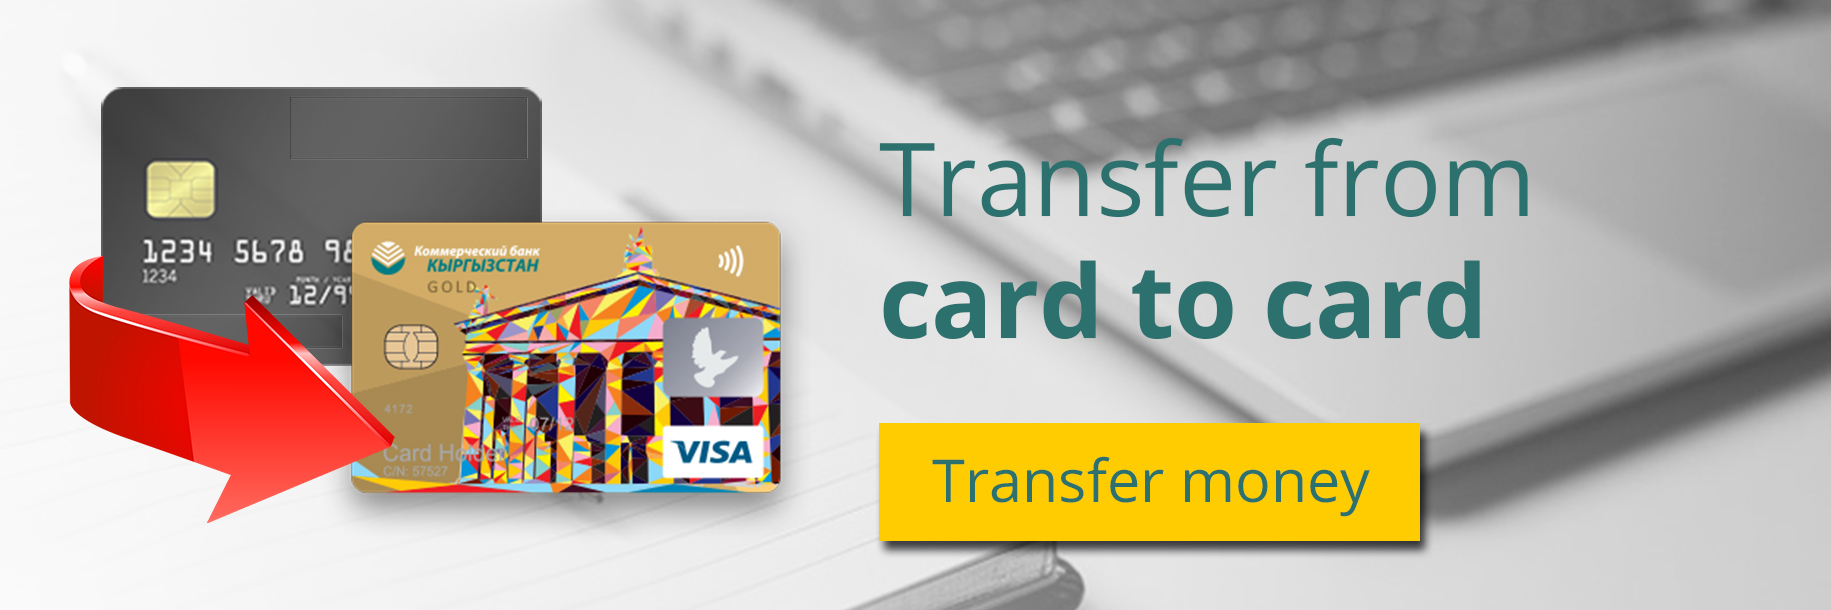 Card transfer. Transfer from Card to Card. Transfer 1000 to the Card. Transferul ву credit fin COMBANK. Transfer Funds from Card to Card Europe.